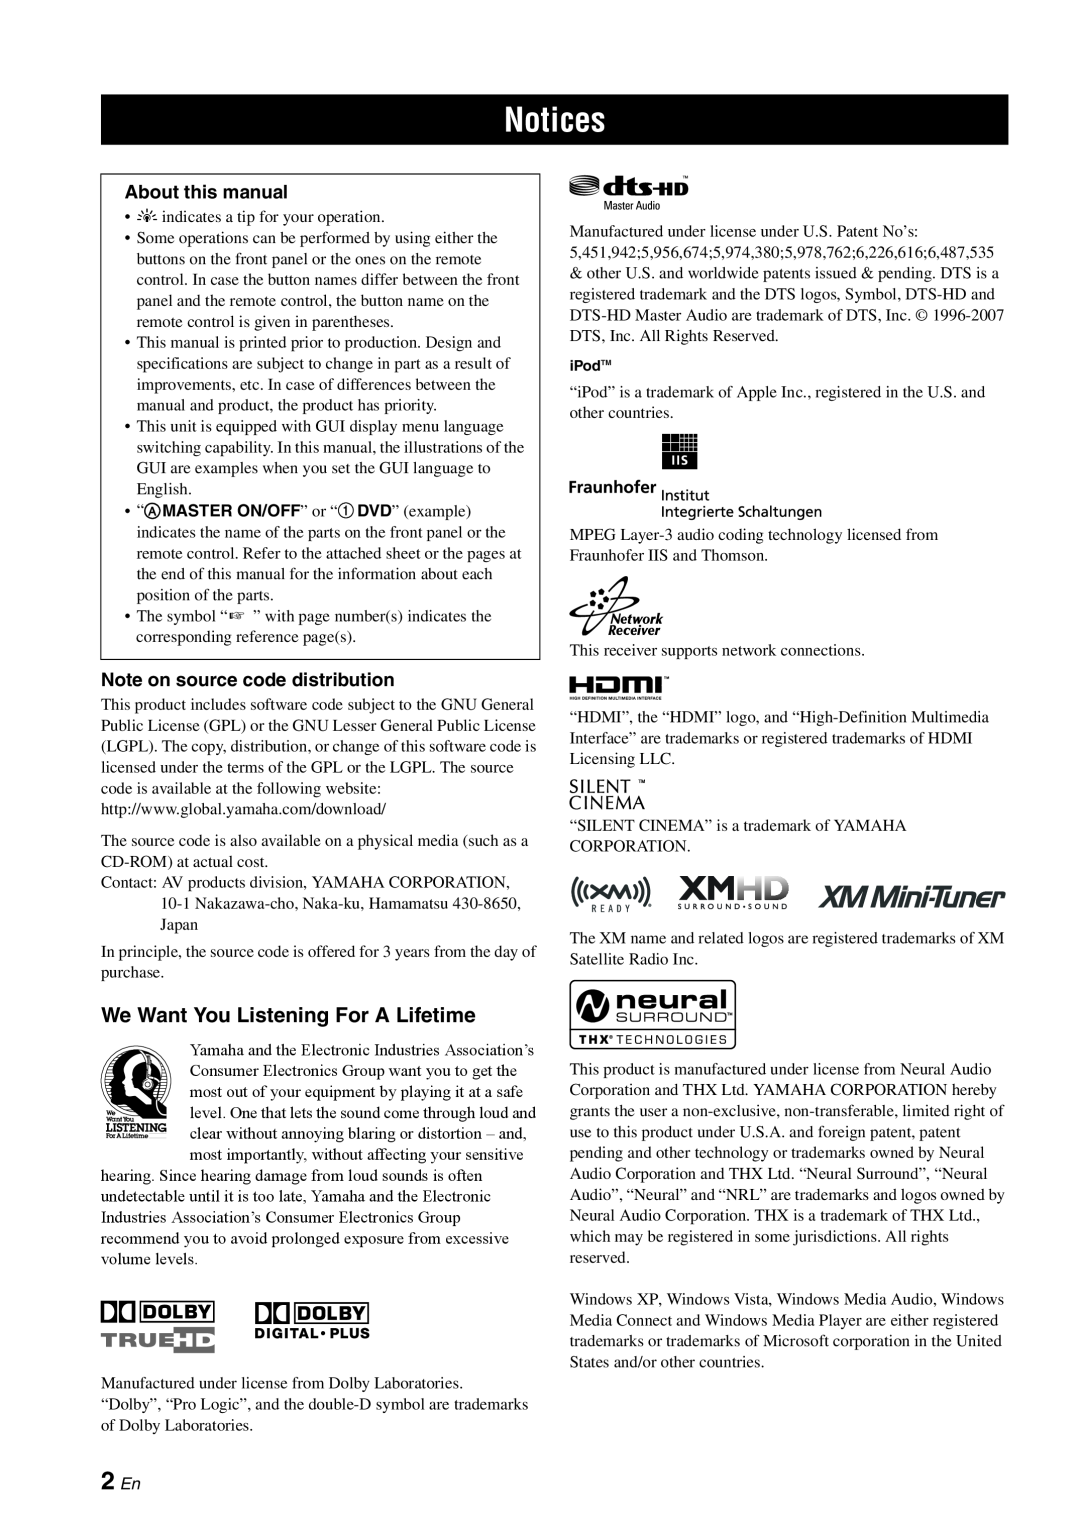 Yamaha RX-V3800 Notices, 2 En, We Want You Listening For A Lifetime, About this manual, Note on source code distribution 